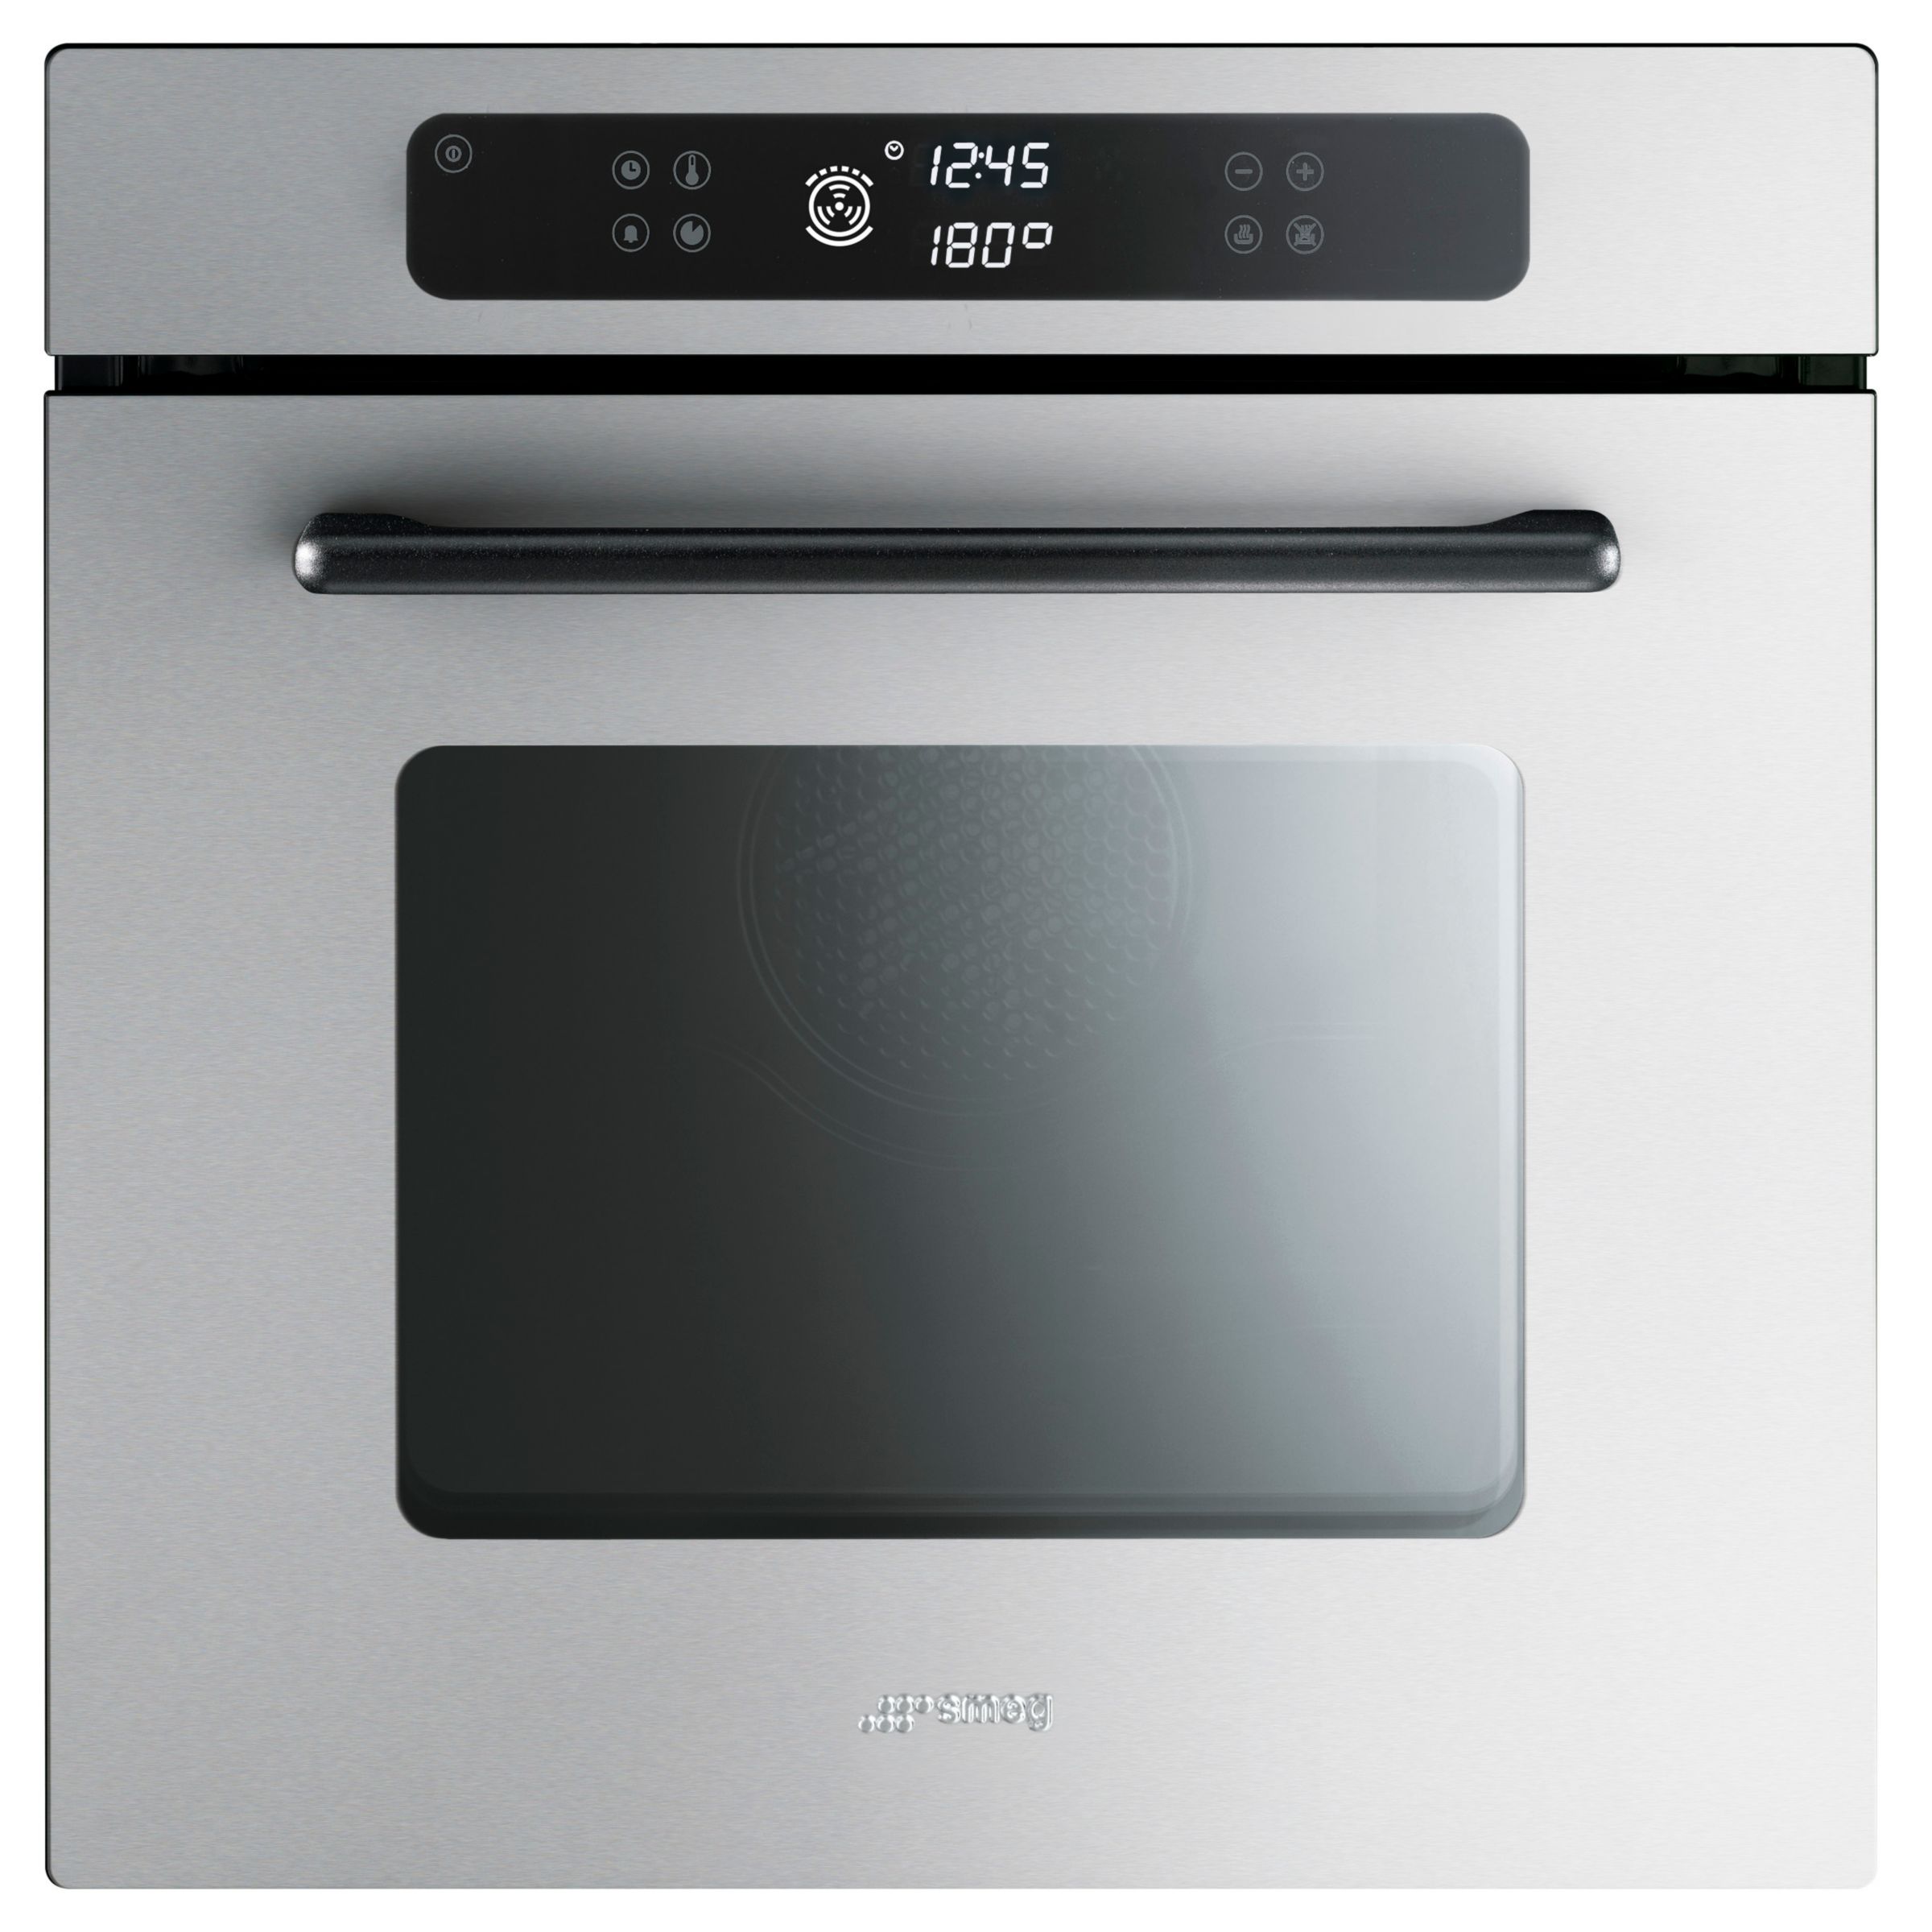 Smeg FP610X Marc Newson Single Electric Oven, Stainless Steel at John Lewis